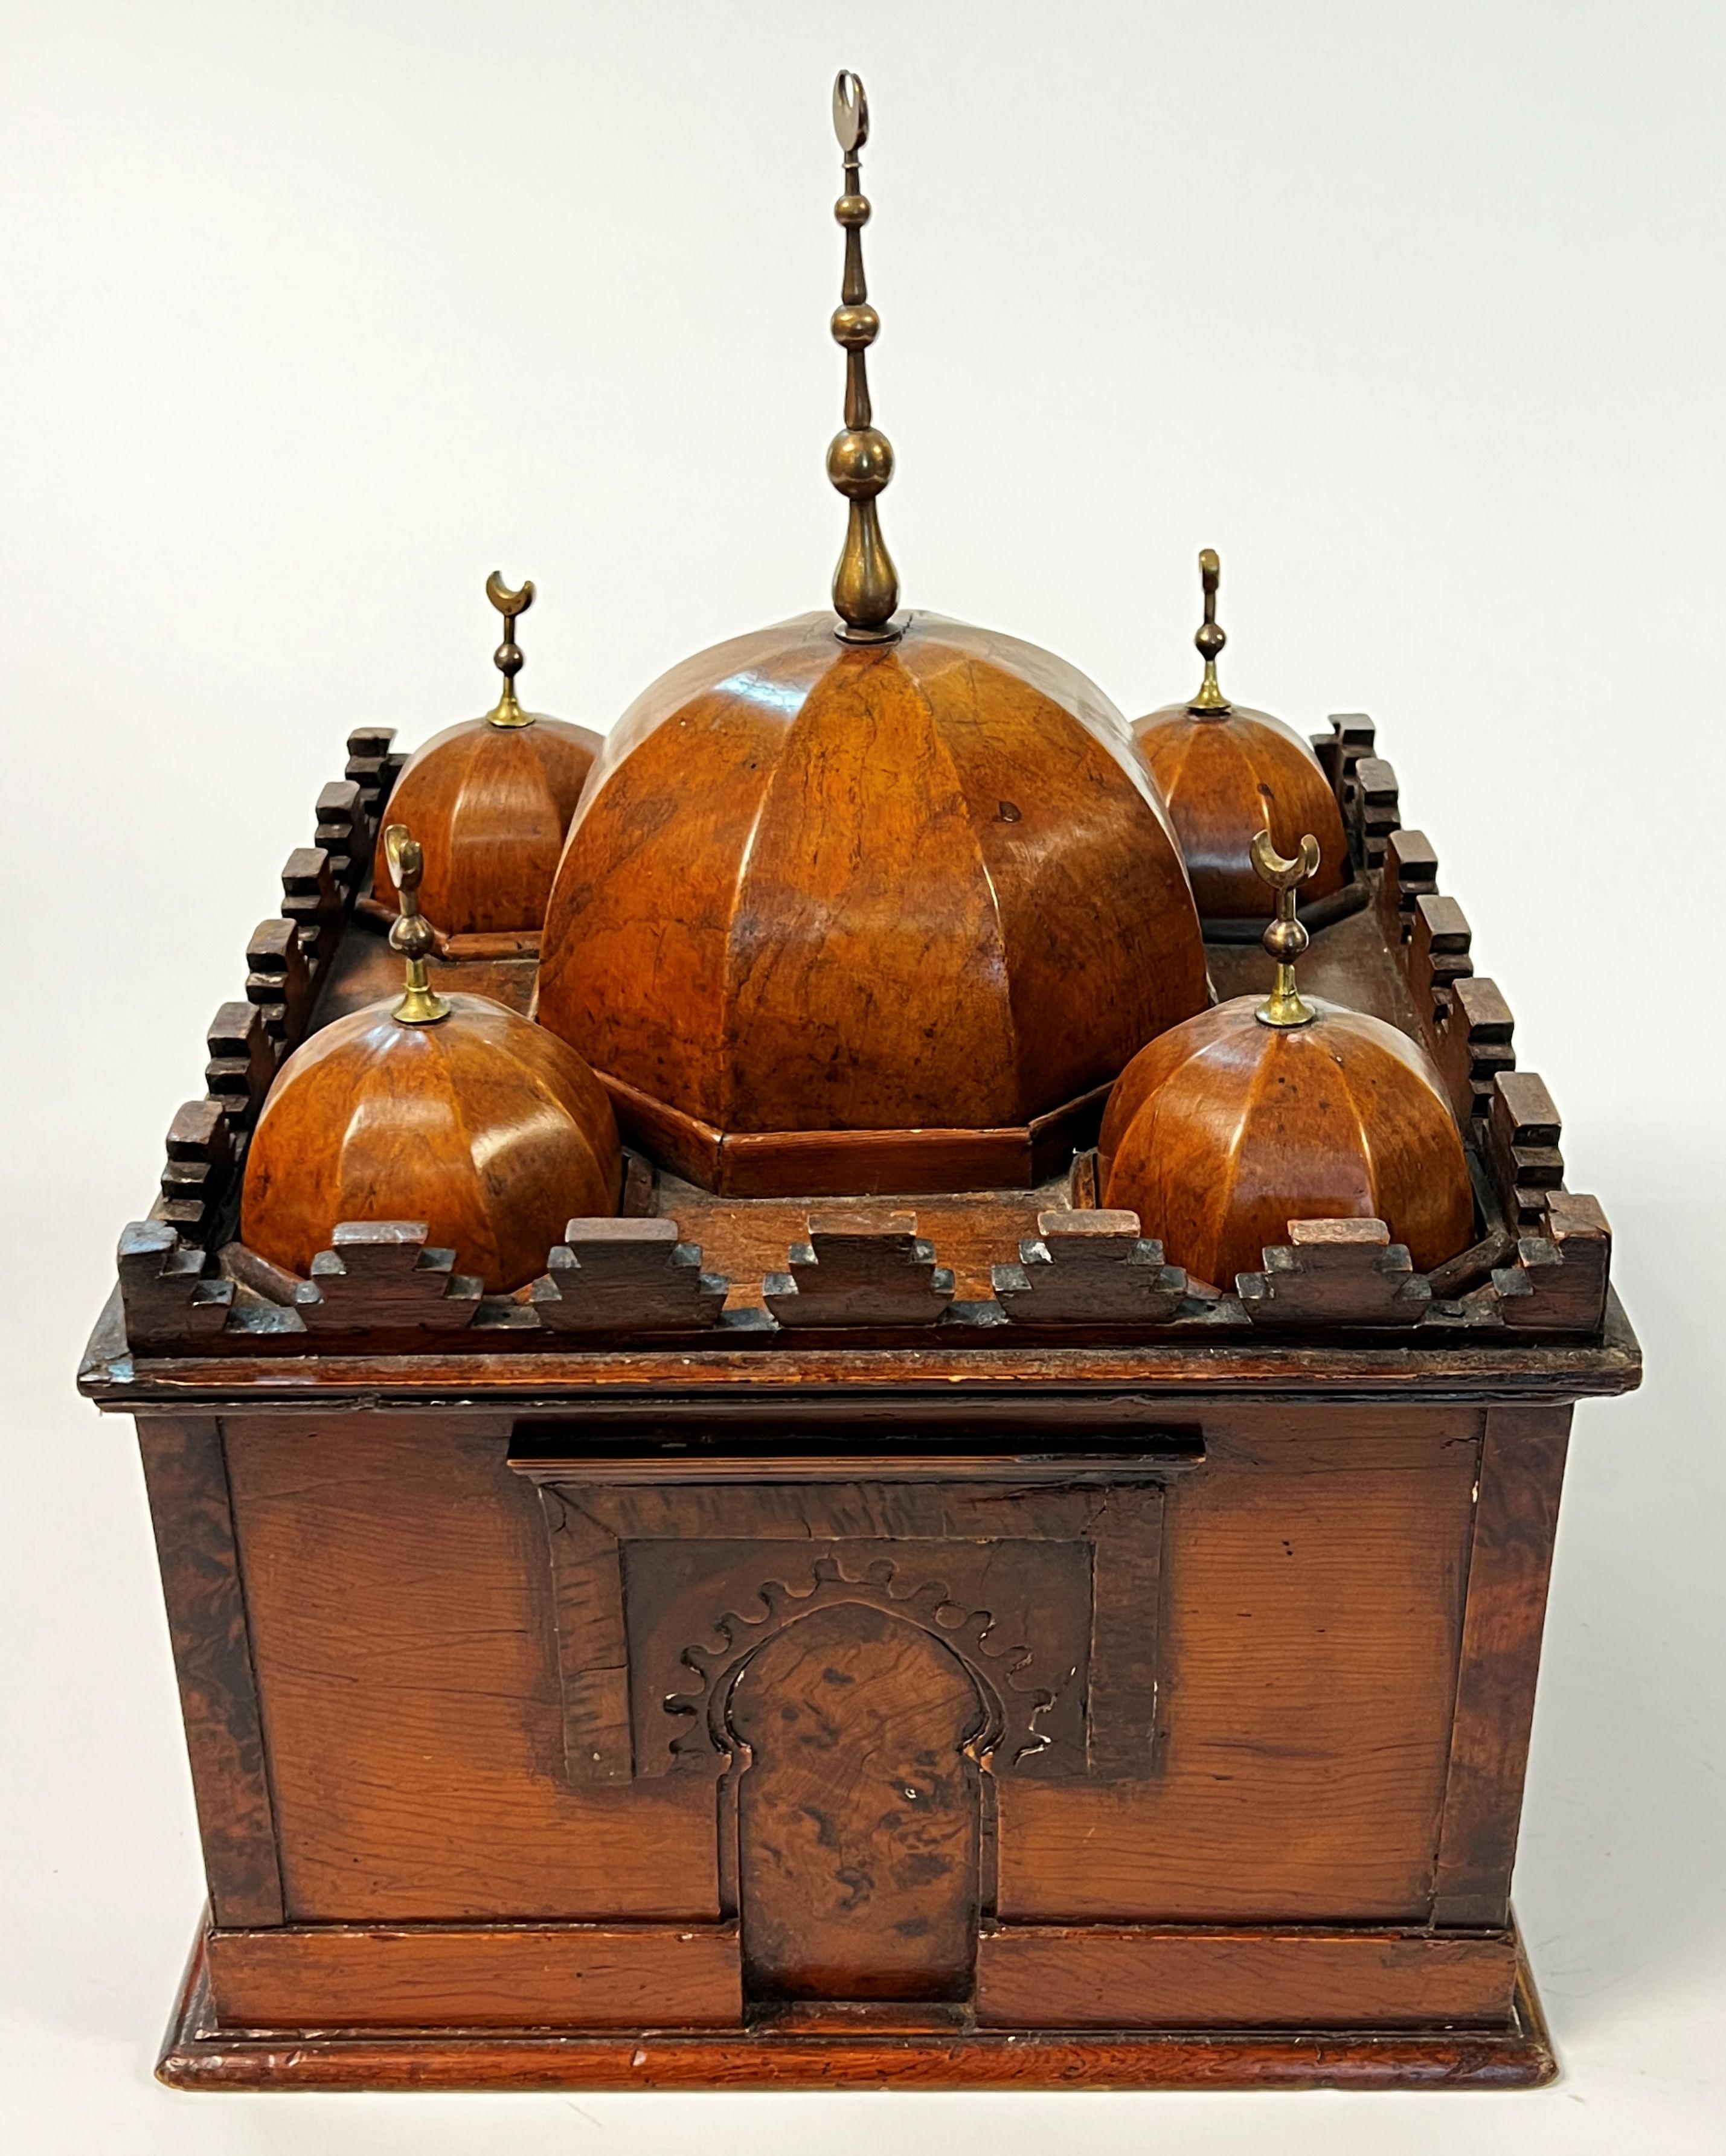 Our charming and rare cellaret in the form of a mosque is crafted from fruitwood and brass. It has a center dome and four smaller domes each decorated with brass crescent moons, each removeable to reveal compartments below to accommodate up to five